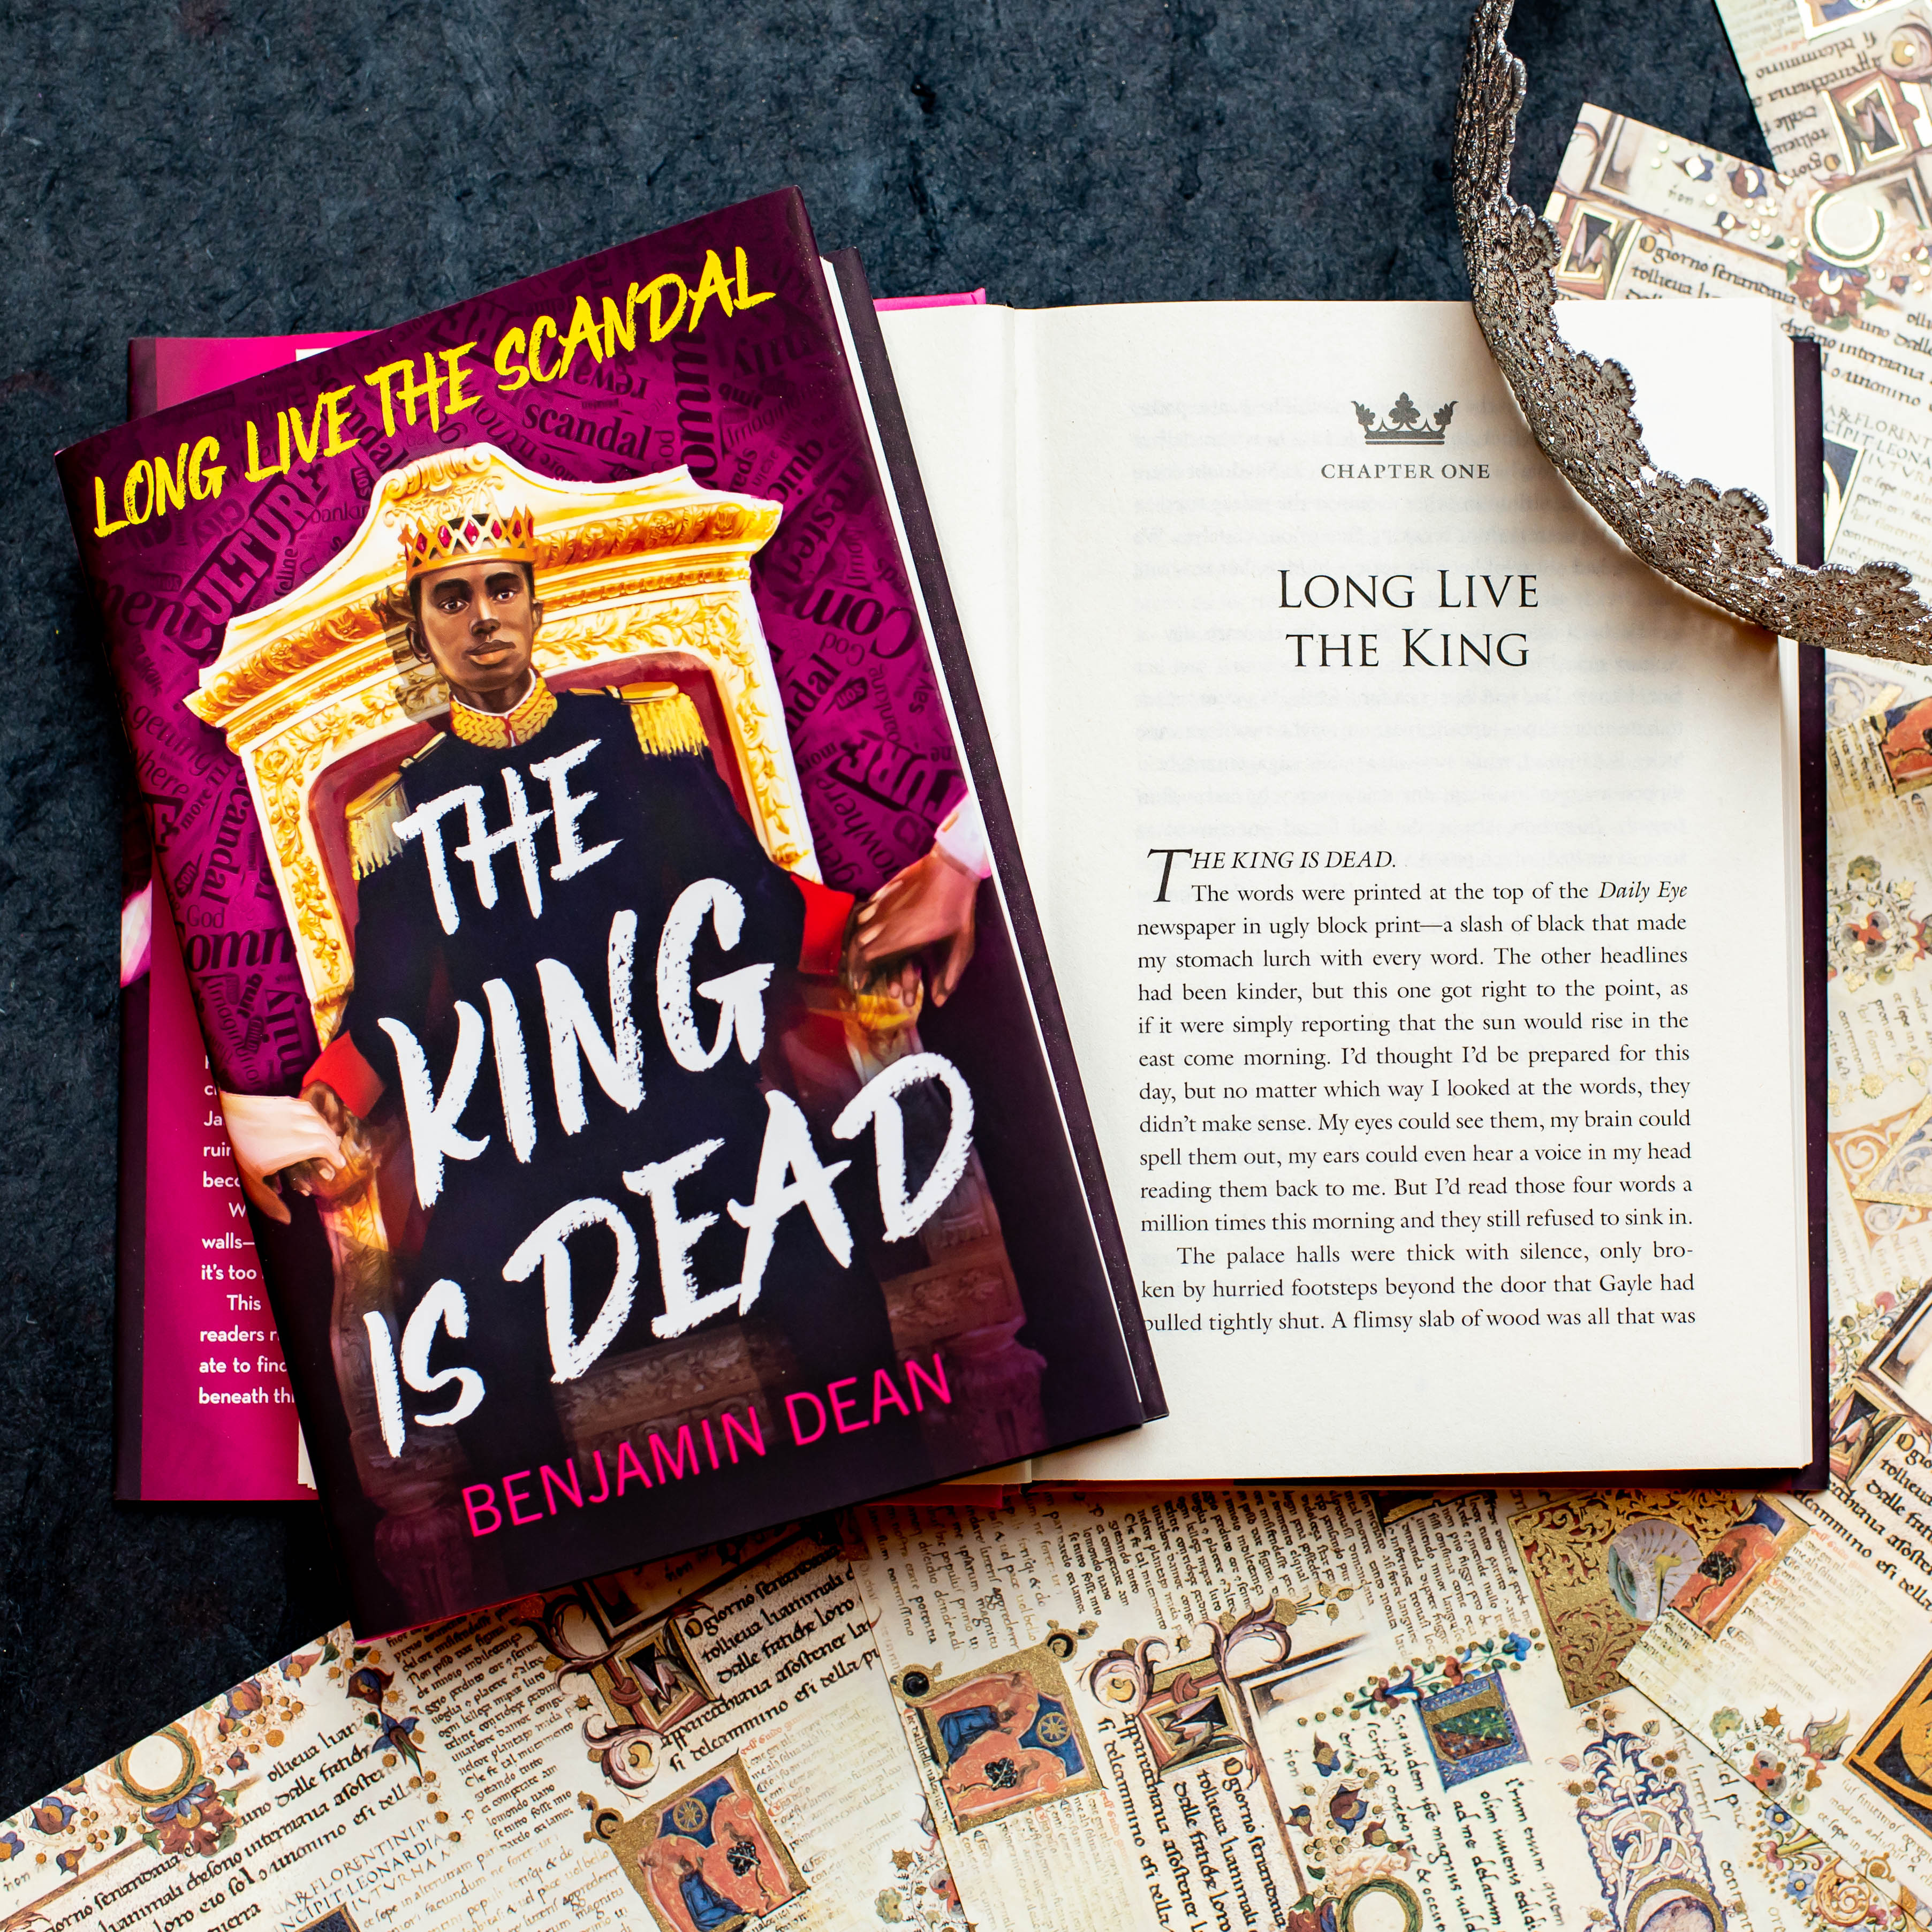 Instagram image of the book 'The King is Dead' by Benjamin Dean